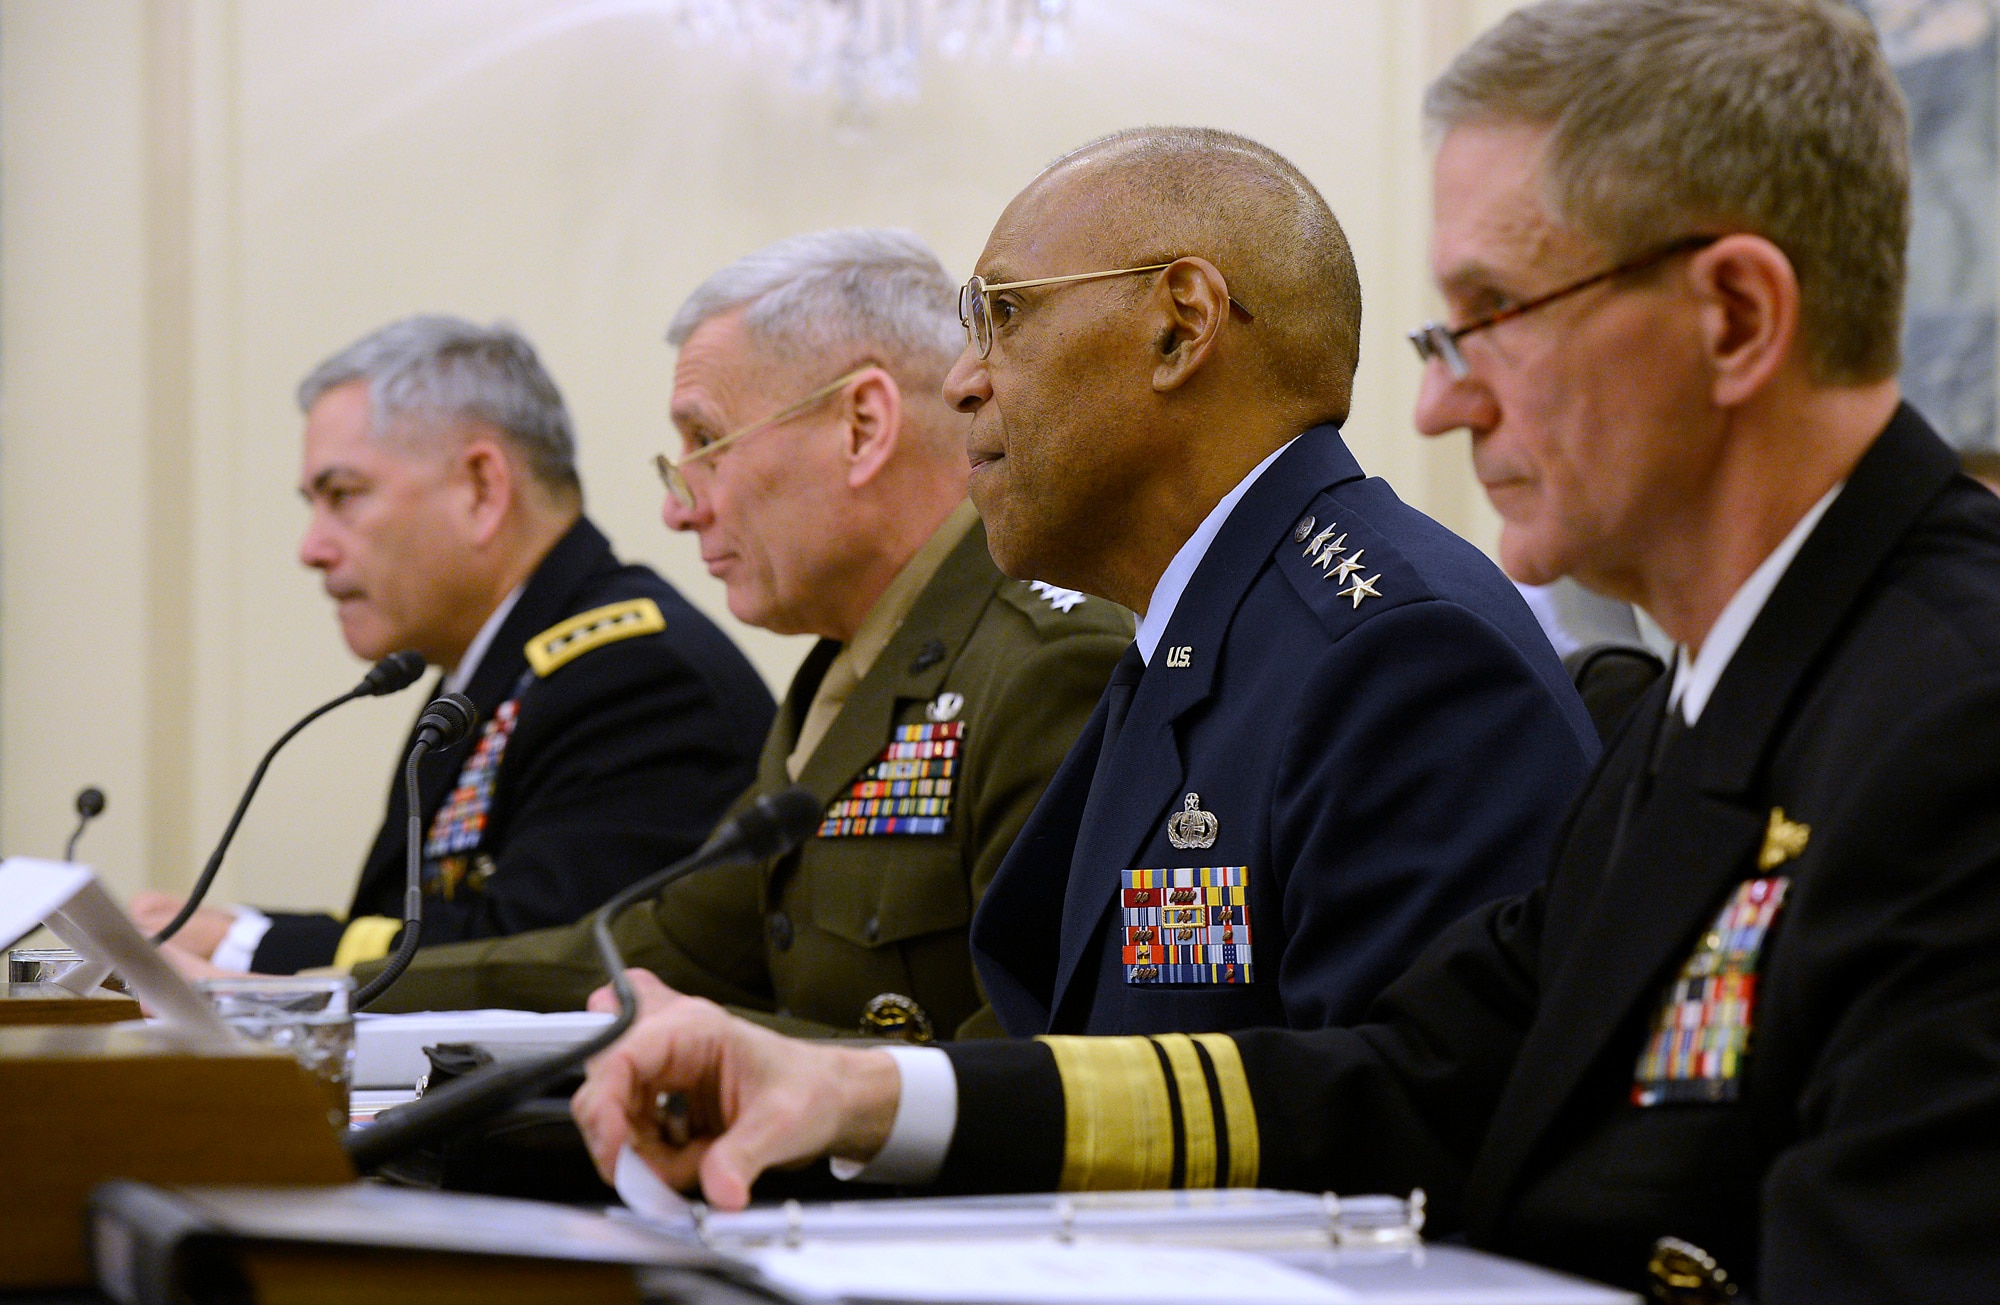 Air Force Vice Chief of Staff Gen. Larry Spencer provides an update of current readiness of the U.S. Air Force before the Senate Subcommittee on Readiness and Management Support in Washington, D.C., March 26, 2014.  Also testifying for their own services were Gen. John F. Campbell, Army Vice Chief of Staff; Gen. John M. Paxton Jr., Assistant Commandant of the Marine Corps; and Vice Adm. Philip Hart Cullom, deputy chief of Naval Operations for Fleet Readiness and Logistics.  (U.S. Air Force photo/Scott M. Ash)